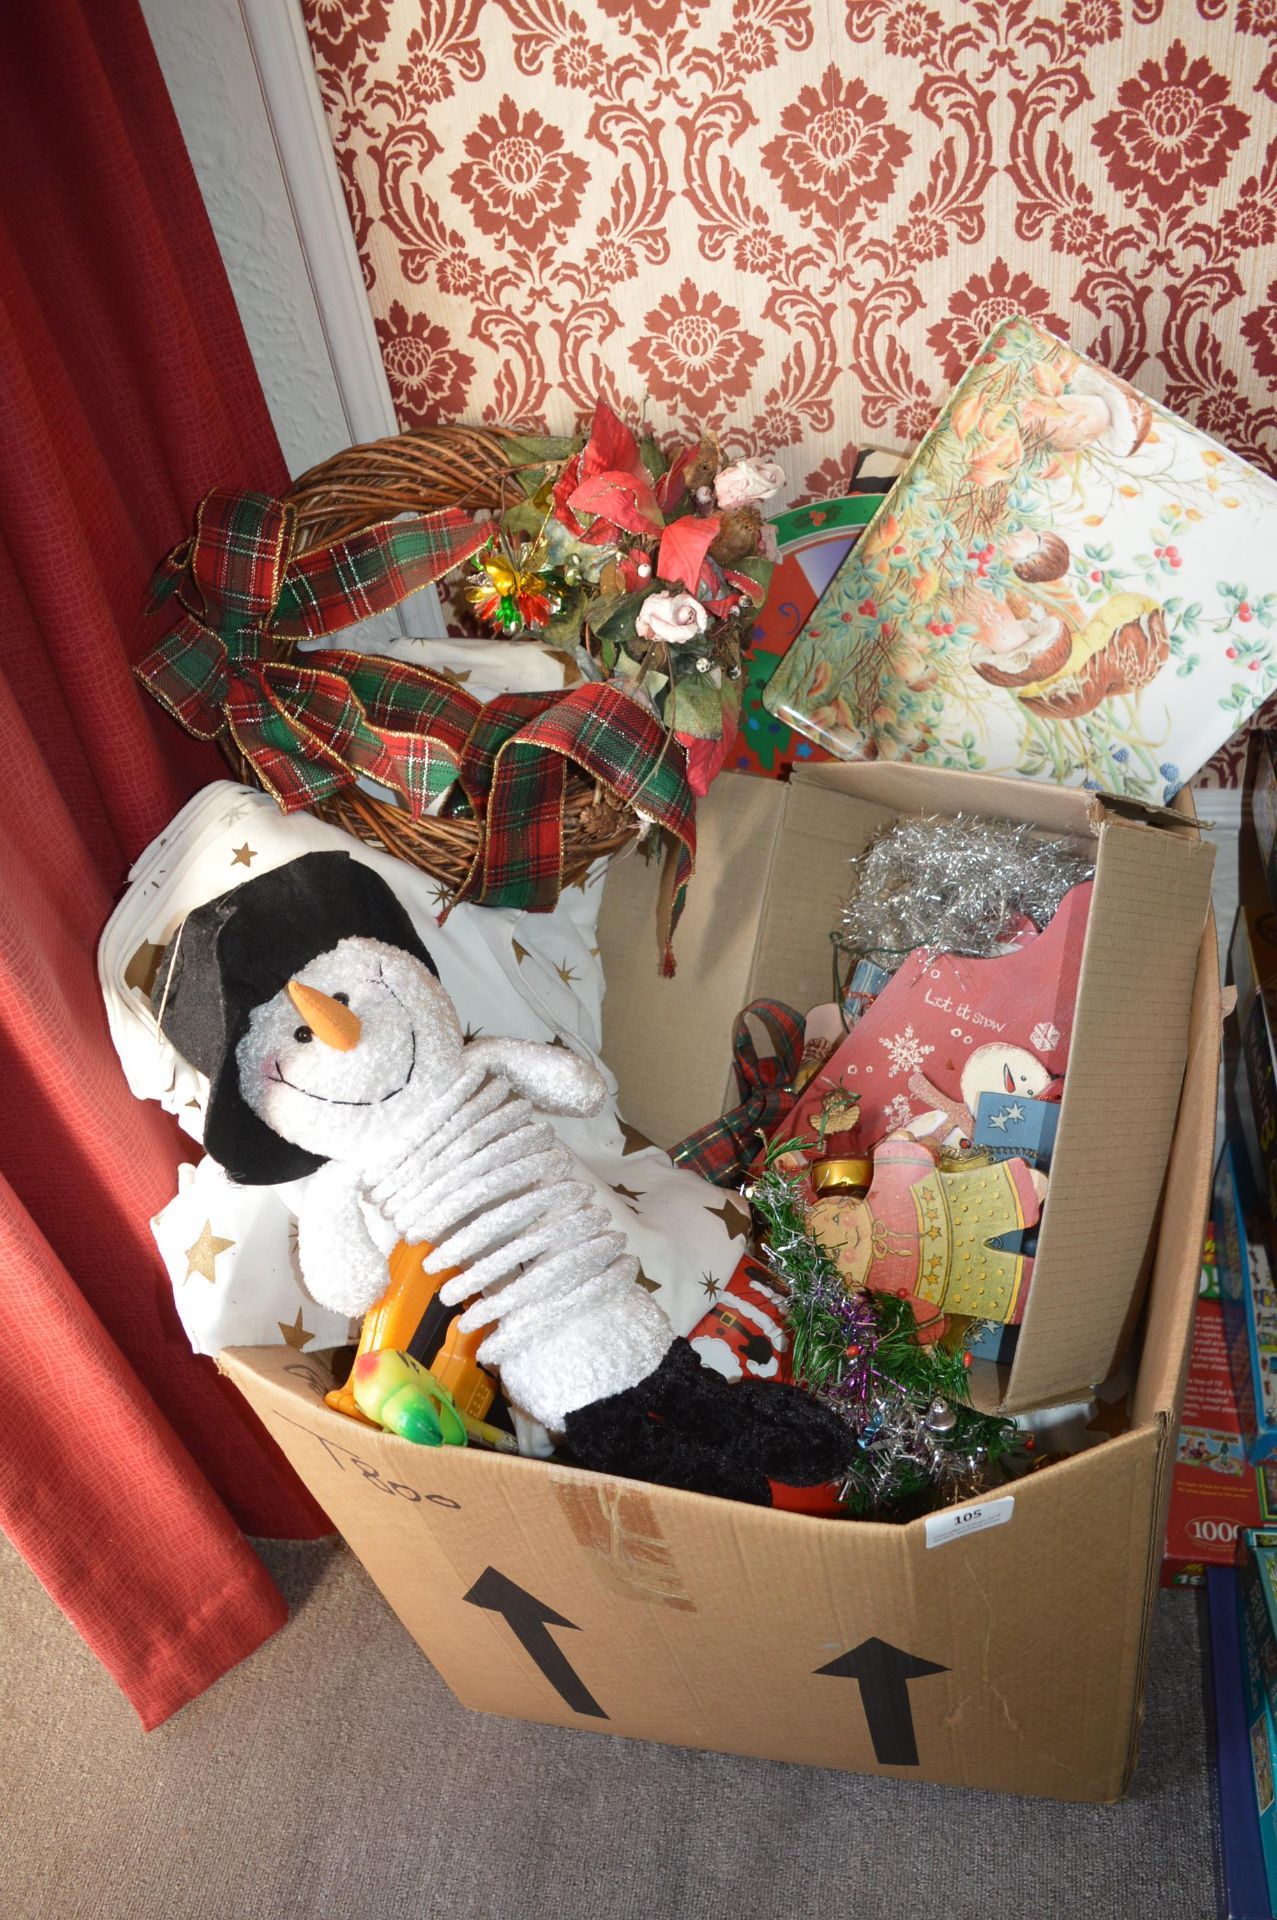 Box Containing Assorted Christmas Decorations, Tablecloths, Trays, etc.